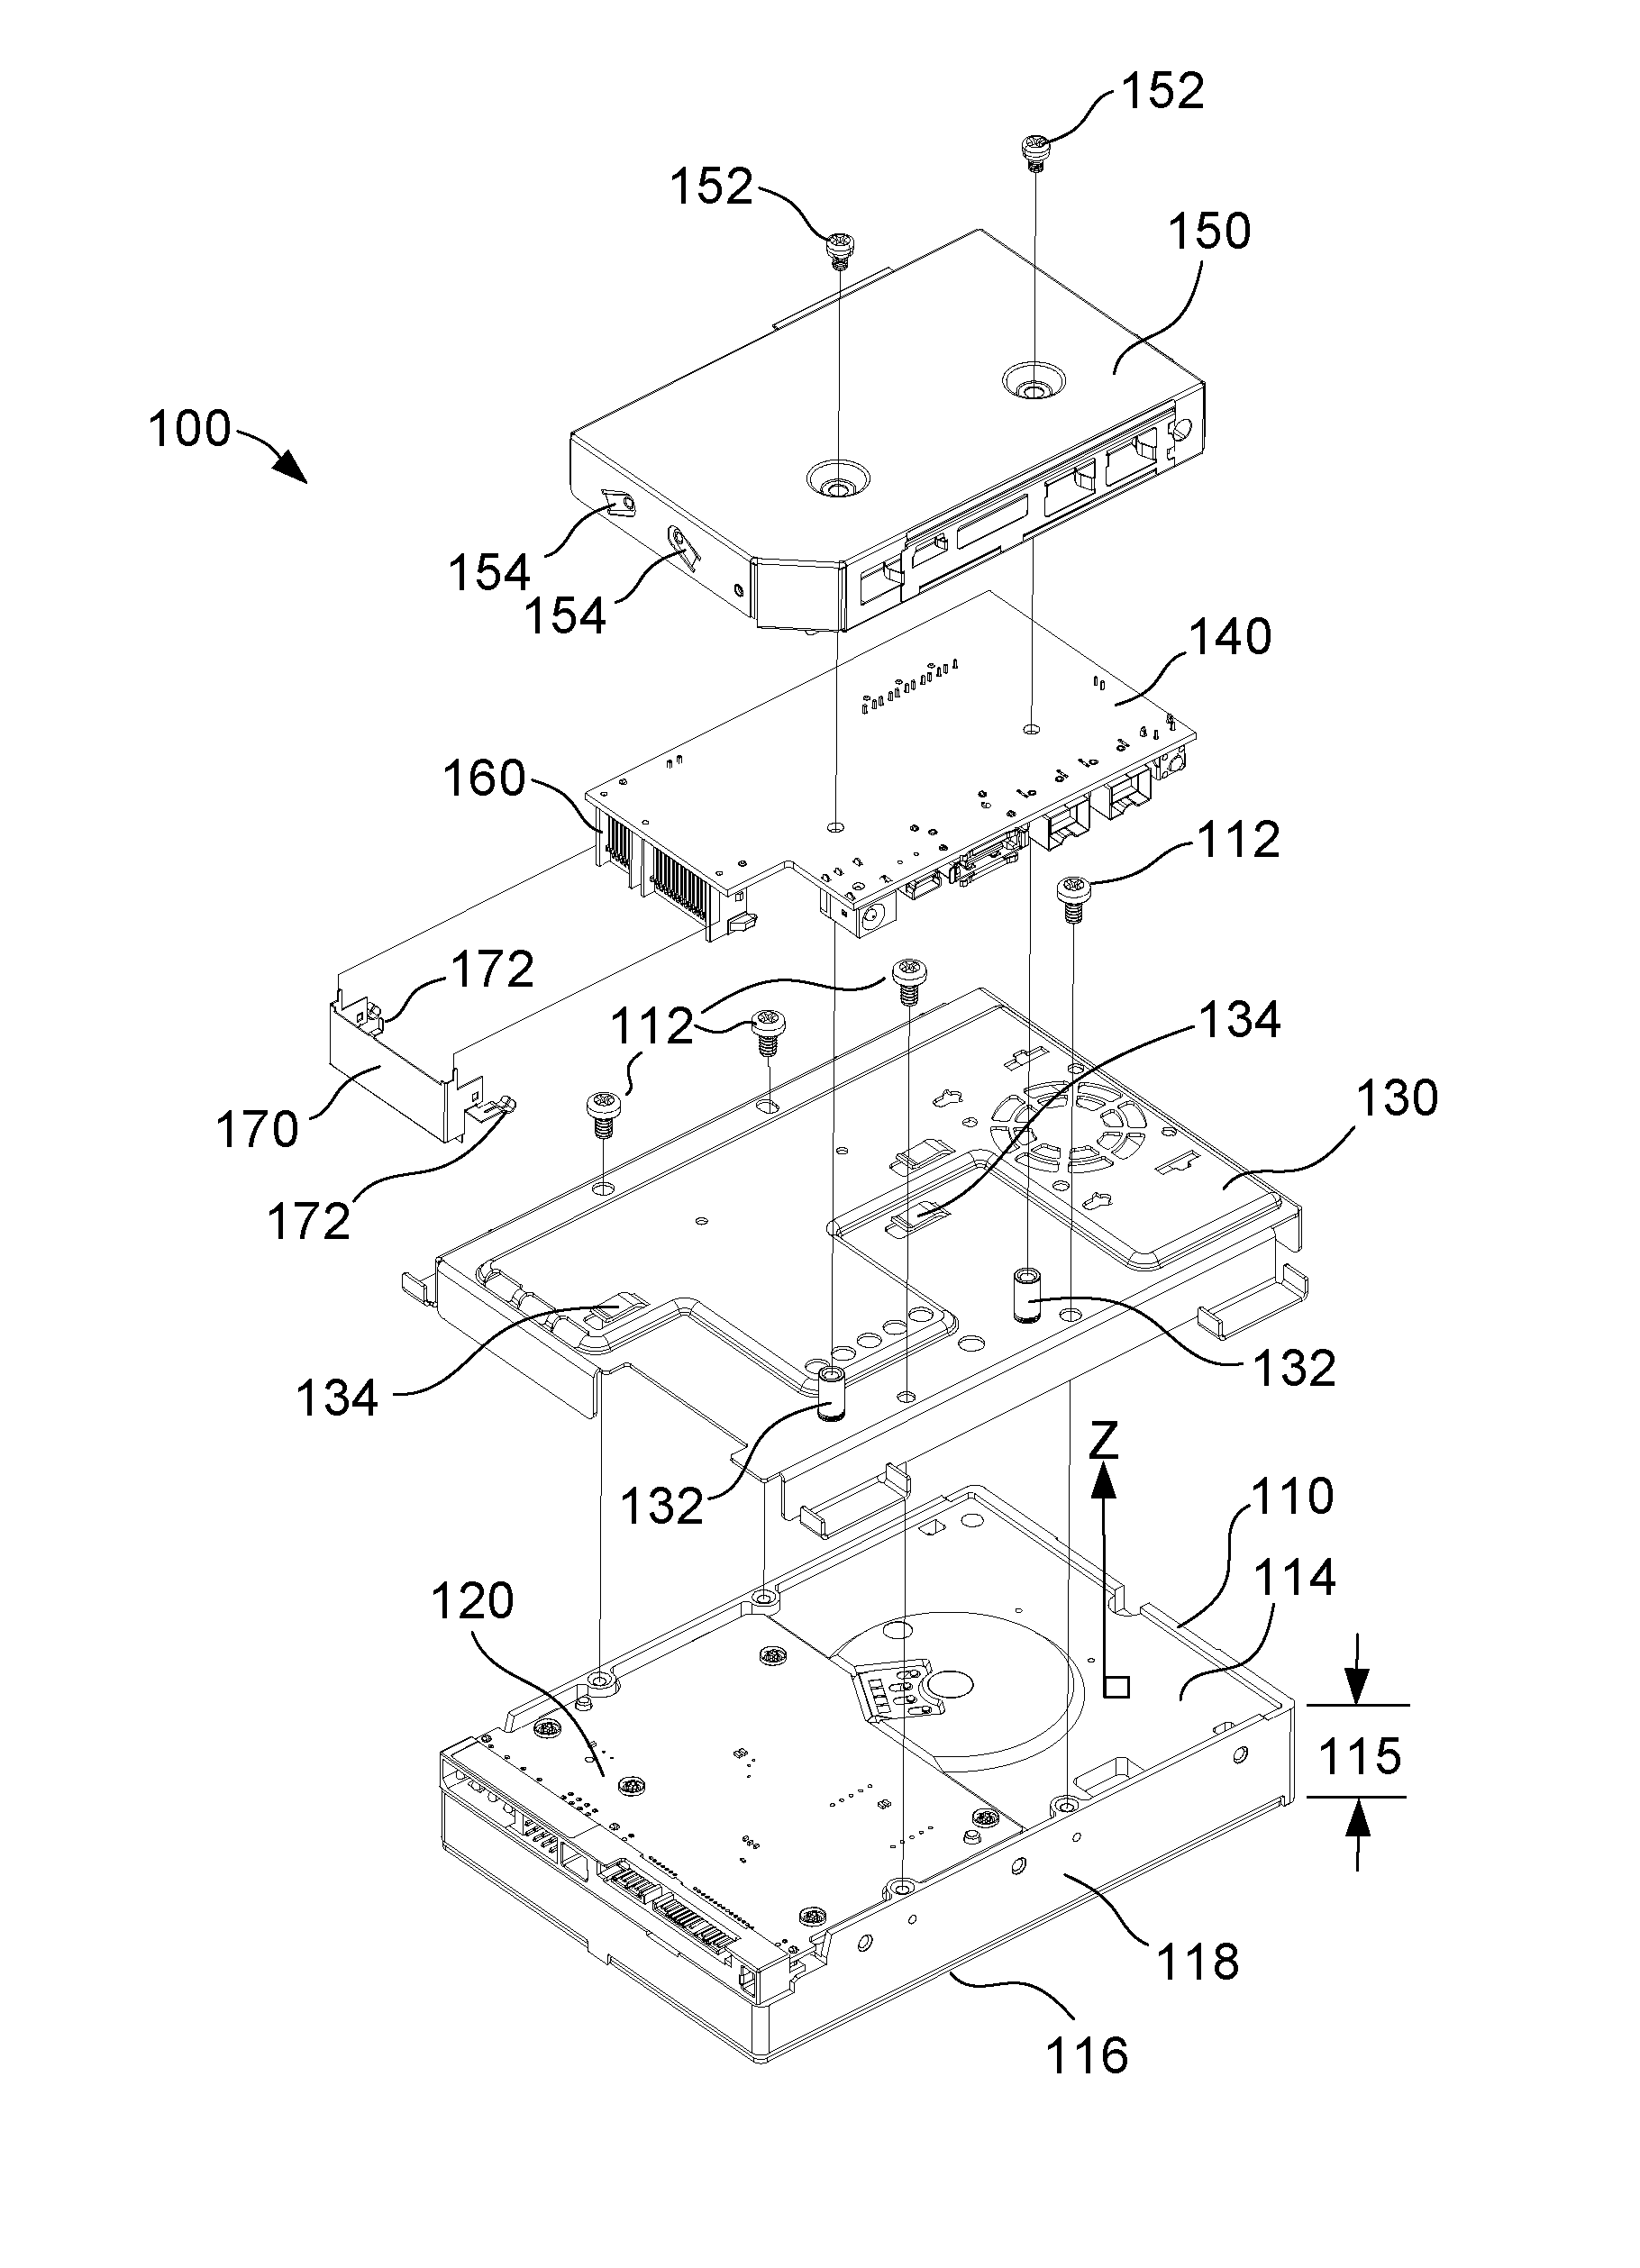 Information storage device having a conductive shield with a peripheral capacitive flange